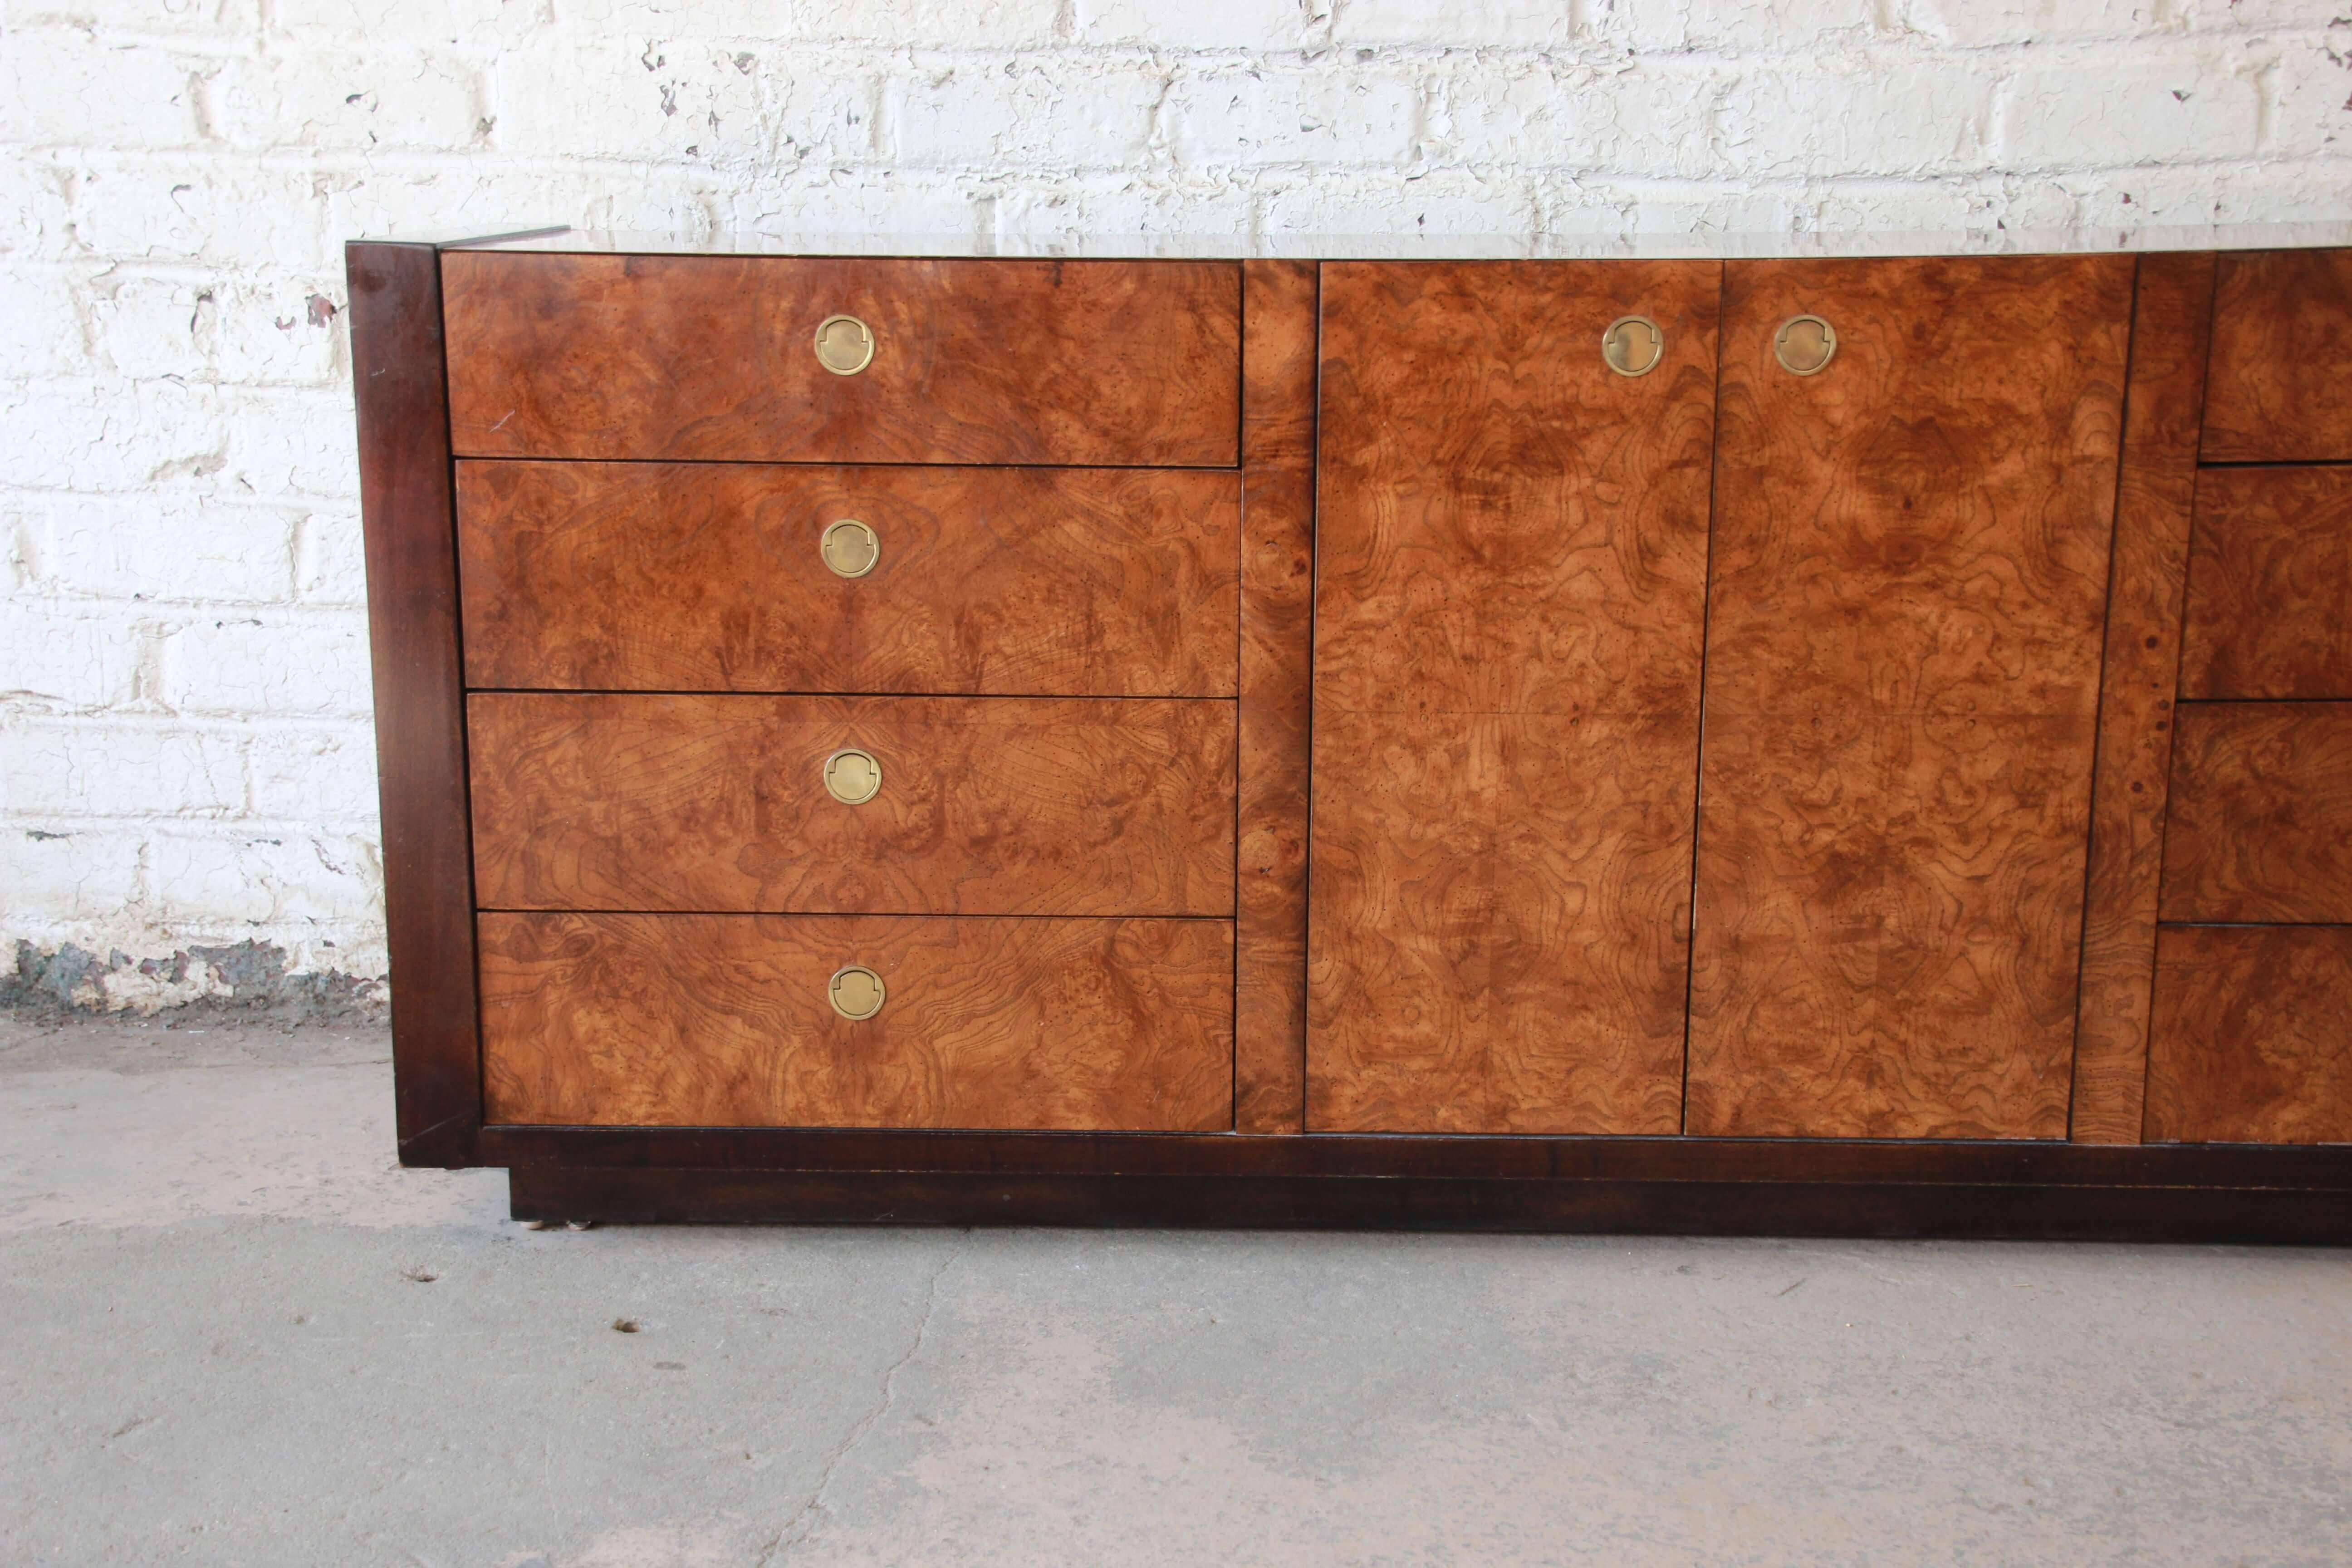 Offering a beautiful Hollywood Regency burled olivewood credenza by Century Furniture. The credenza or dresser offers 12 drawers for ample storage and organization. The drawers have nice brass pulls with drawers that open and close smoothly. The